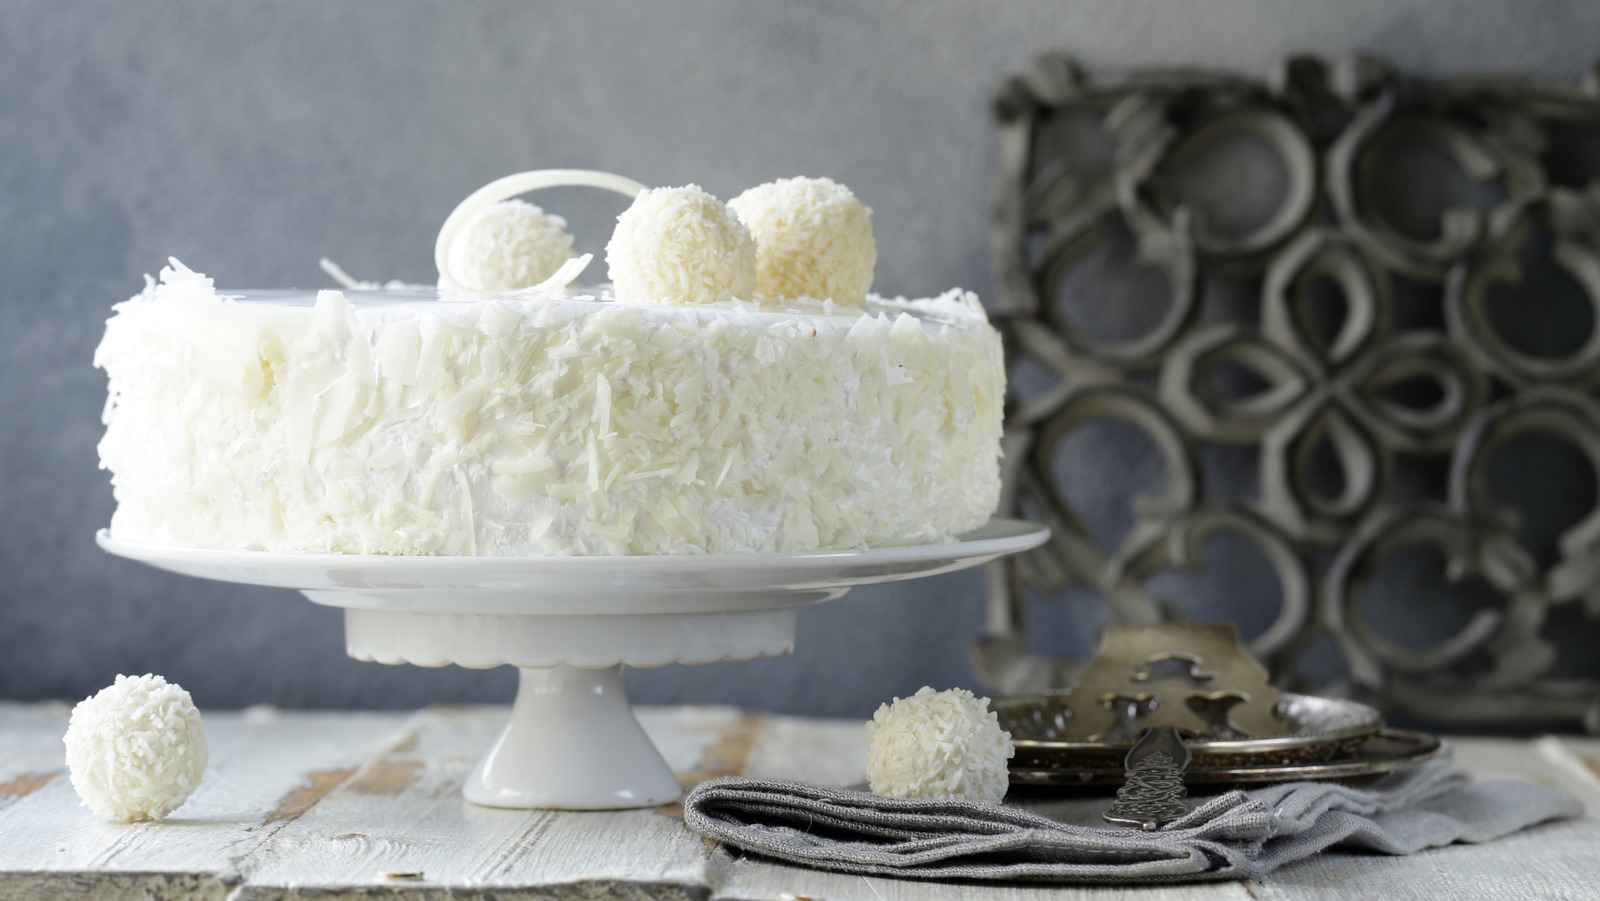 Best Coconut Layer Cake﻿ - How to Make Coconut Layer Cake